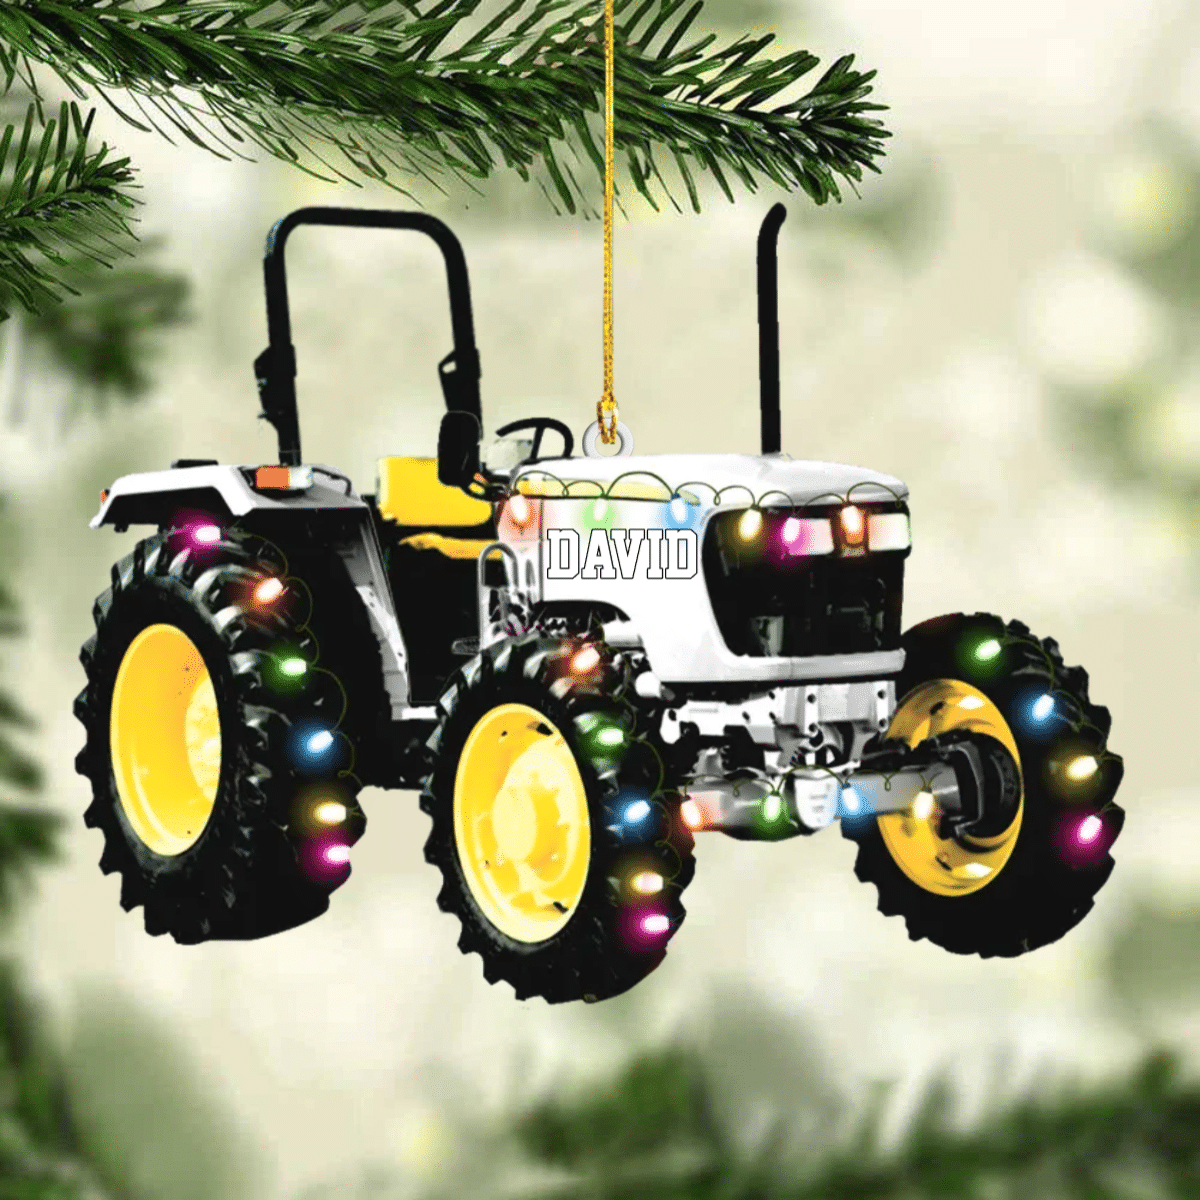 Personalized Tractor Christmas Ornament Version 3 for Farmer/ Gift for Dad